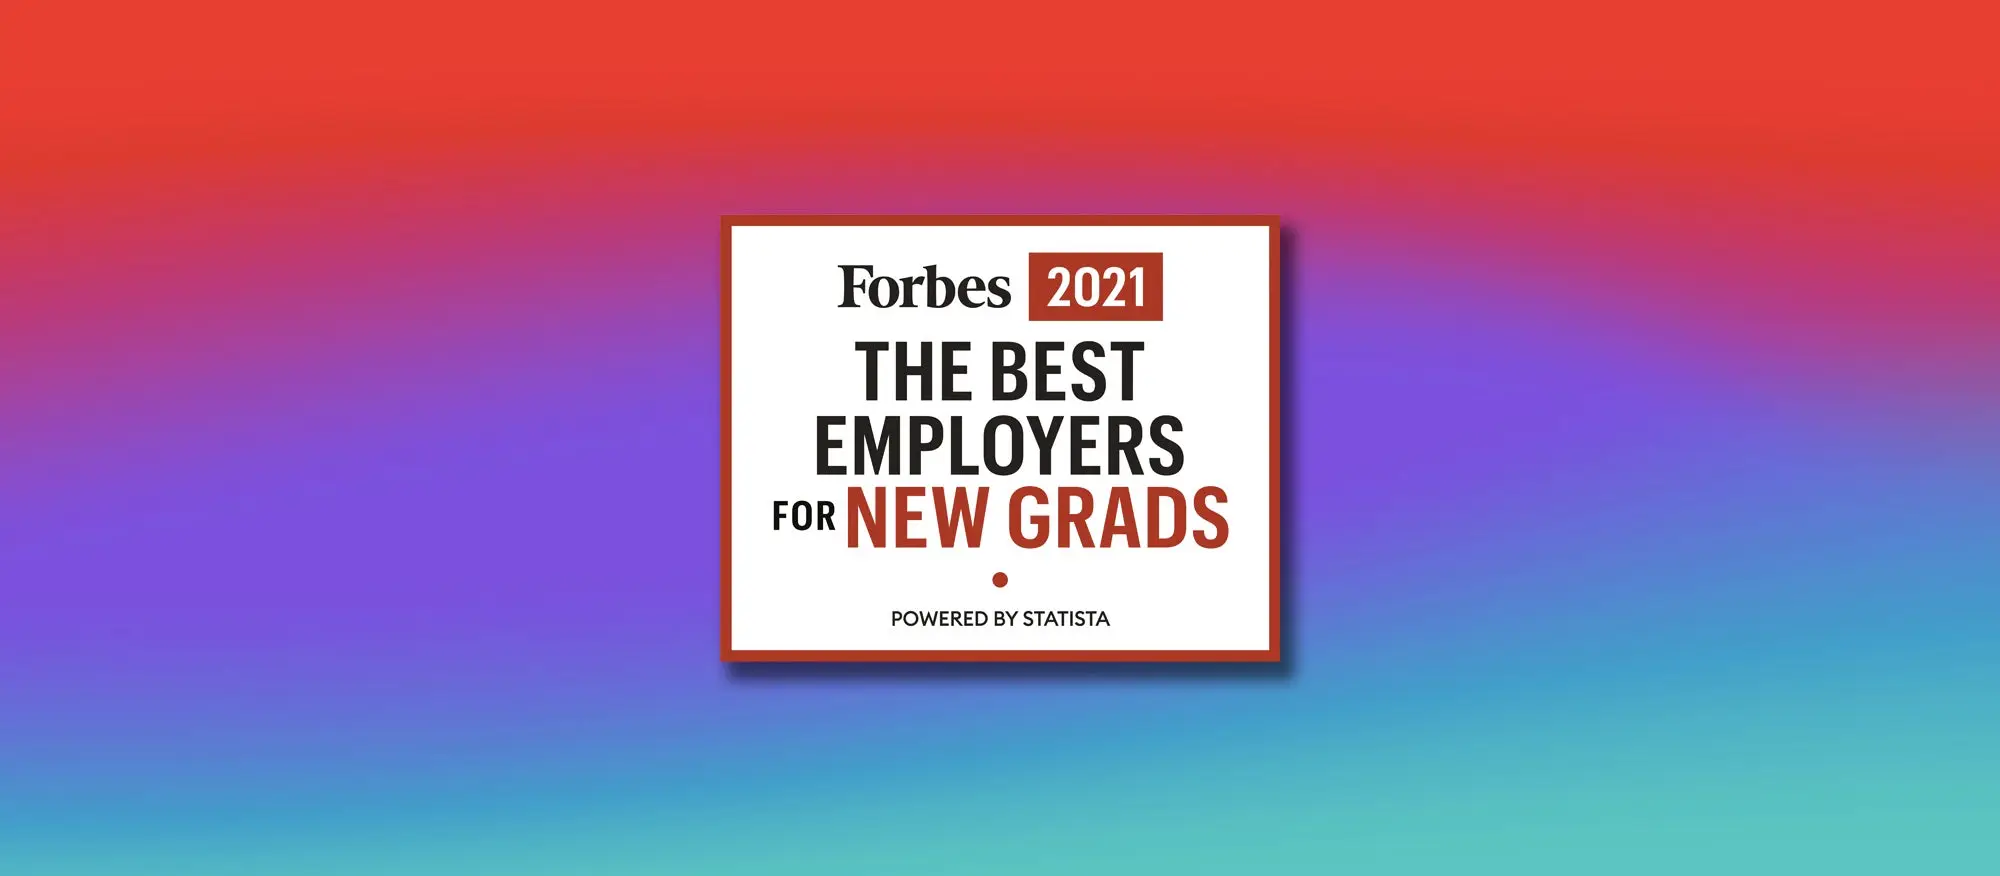 Forbes names Adobe a 2021 Best Employer for New Grads.